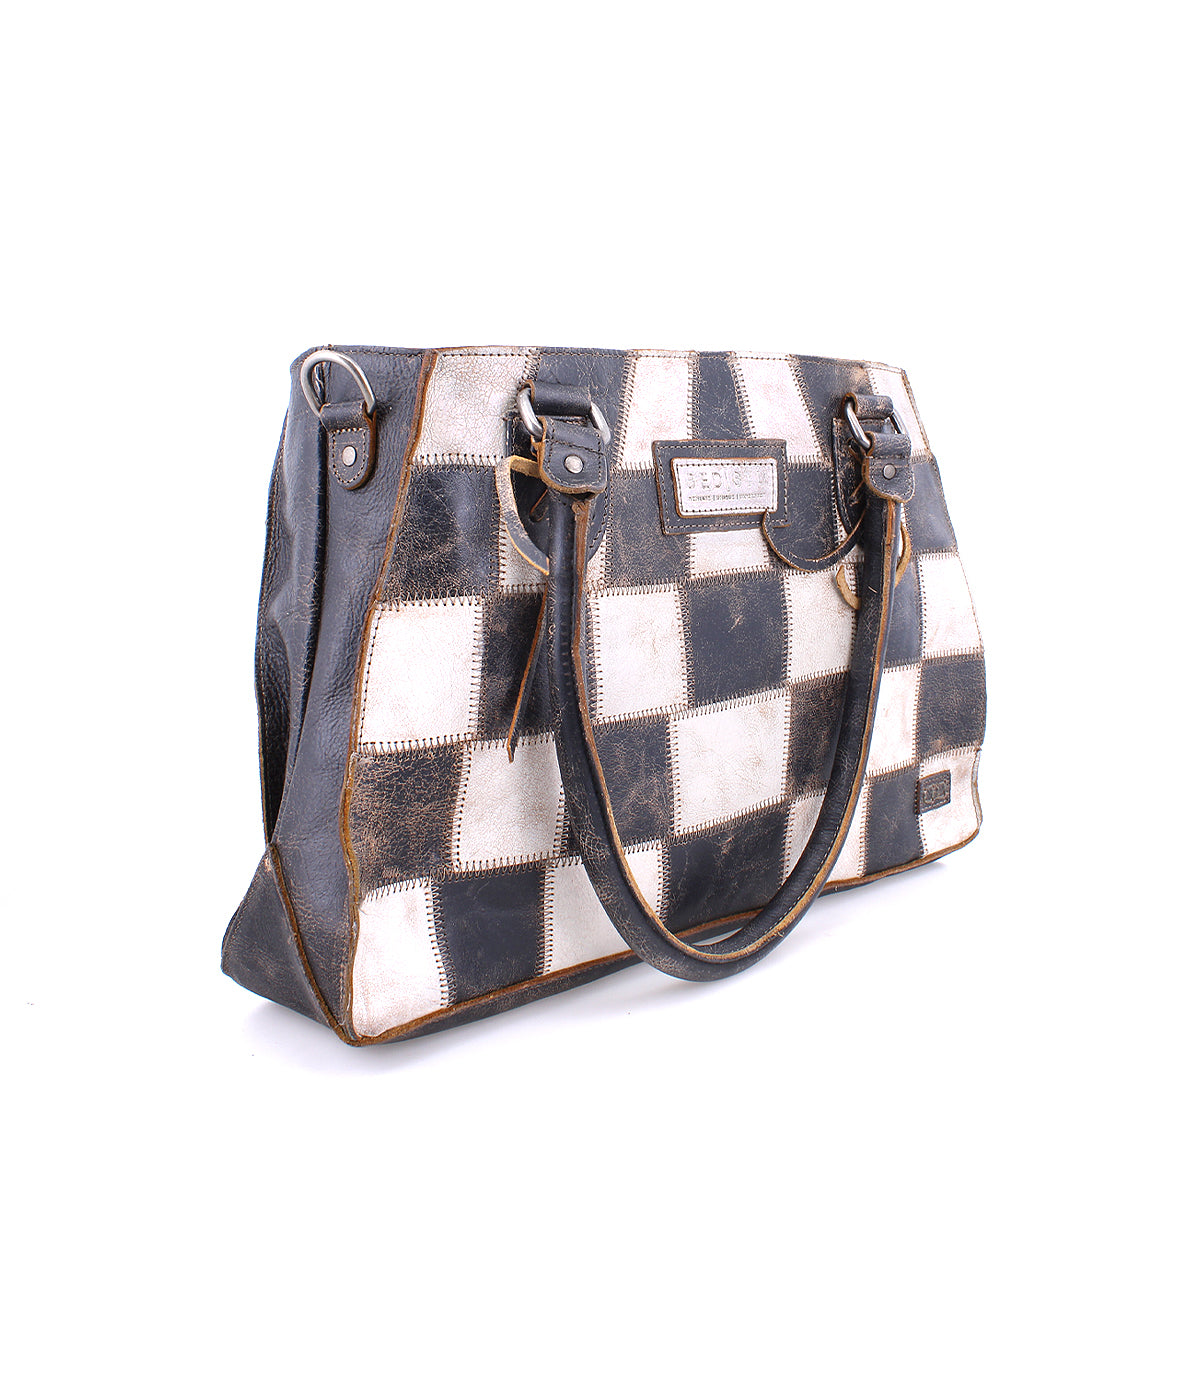 A Rockababy SL handbag with black and white squares and upcycled scrap leather trim stands against a white background, emphasizing sustainability by Bed Stu.